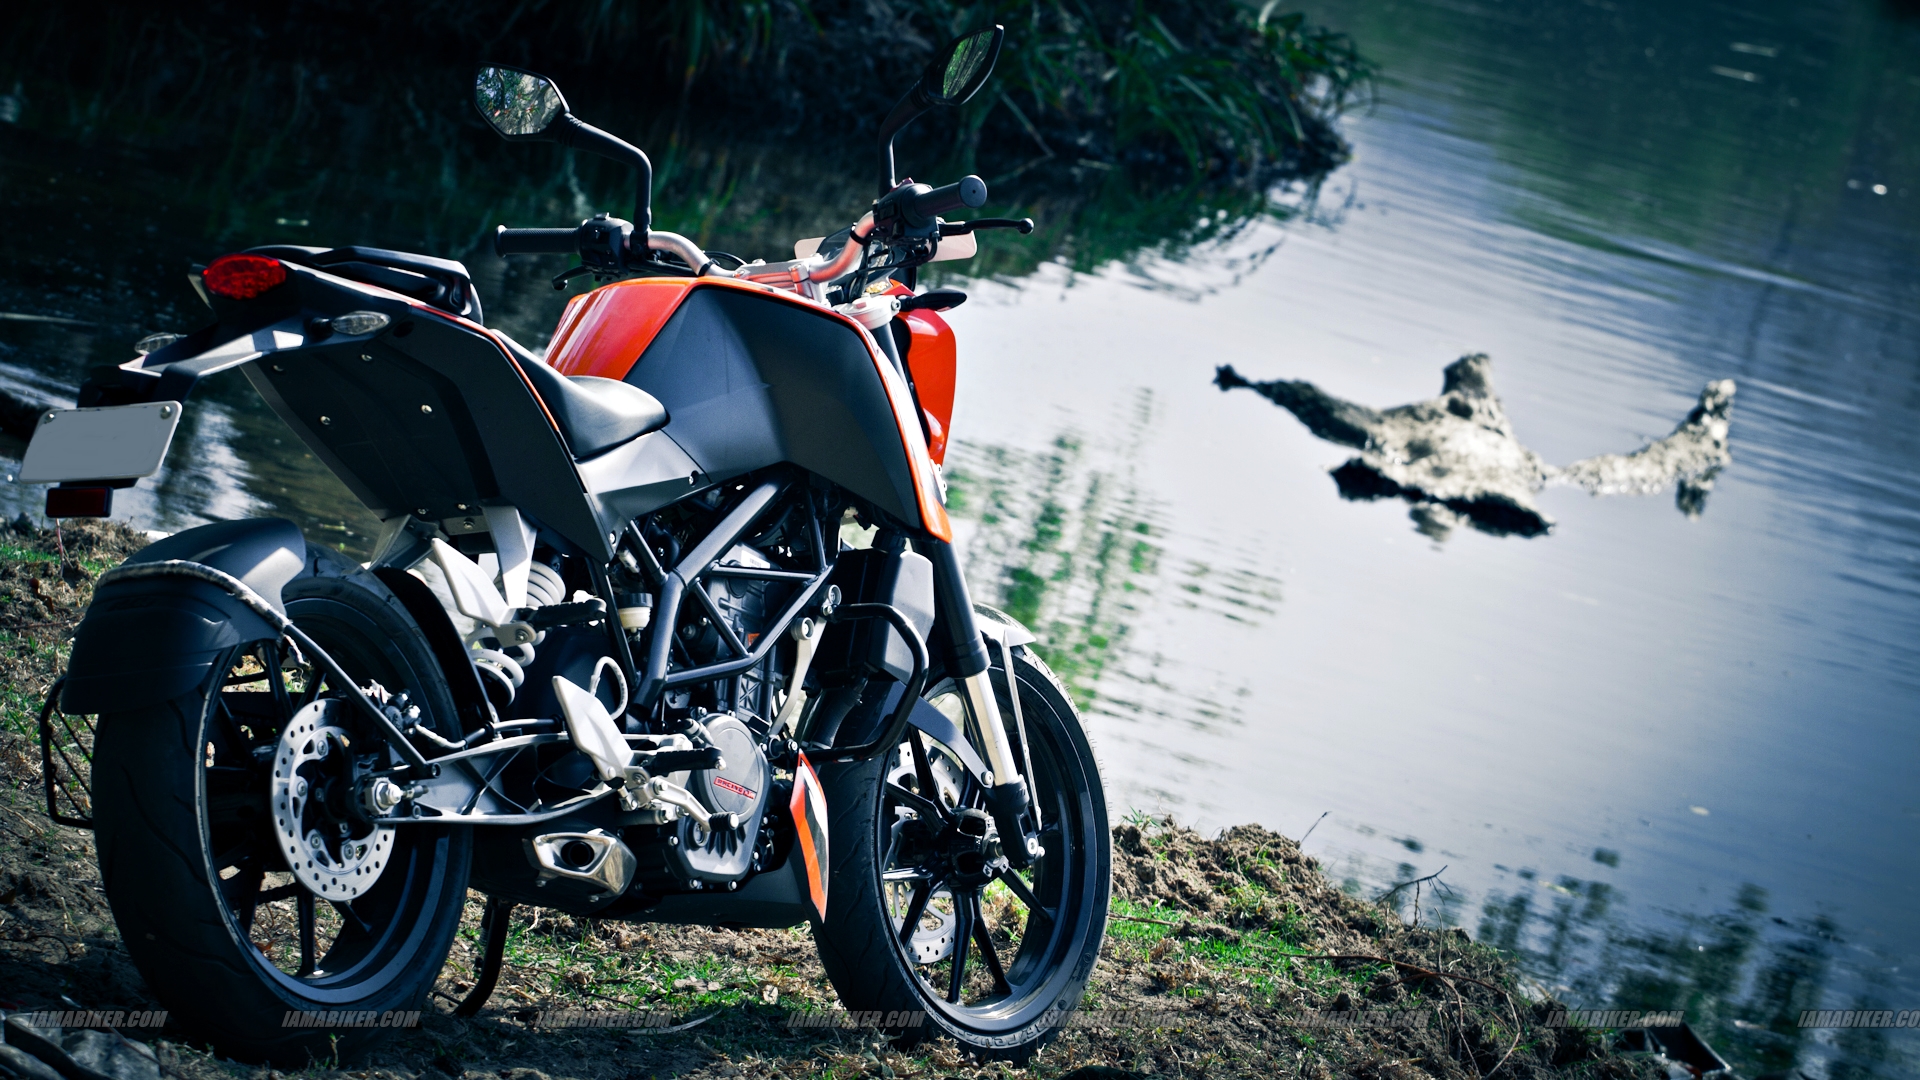 Ktm Duke HD Wallpaper Gallery Click On Picture To See High